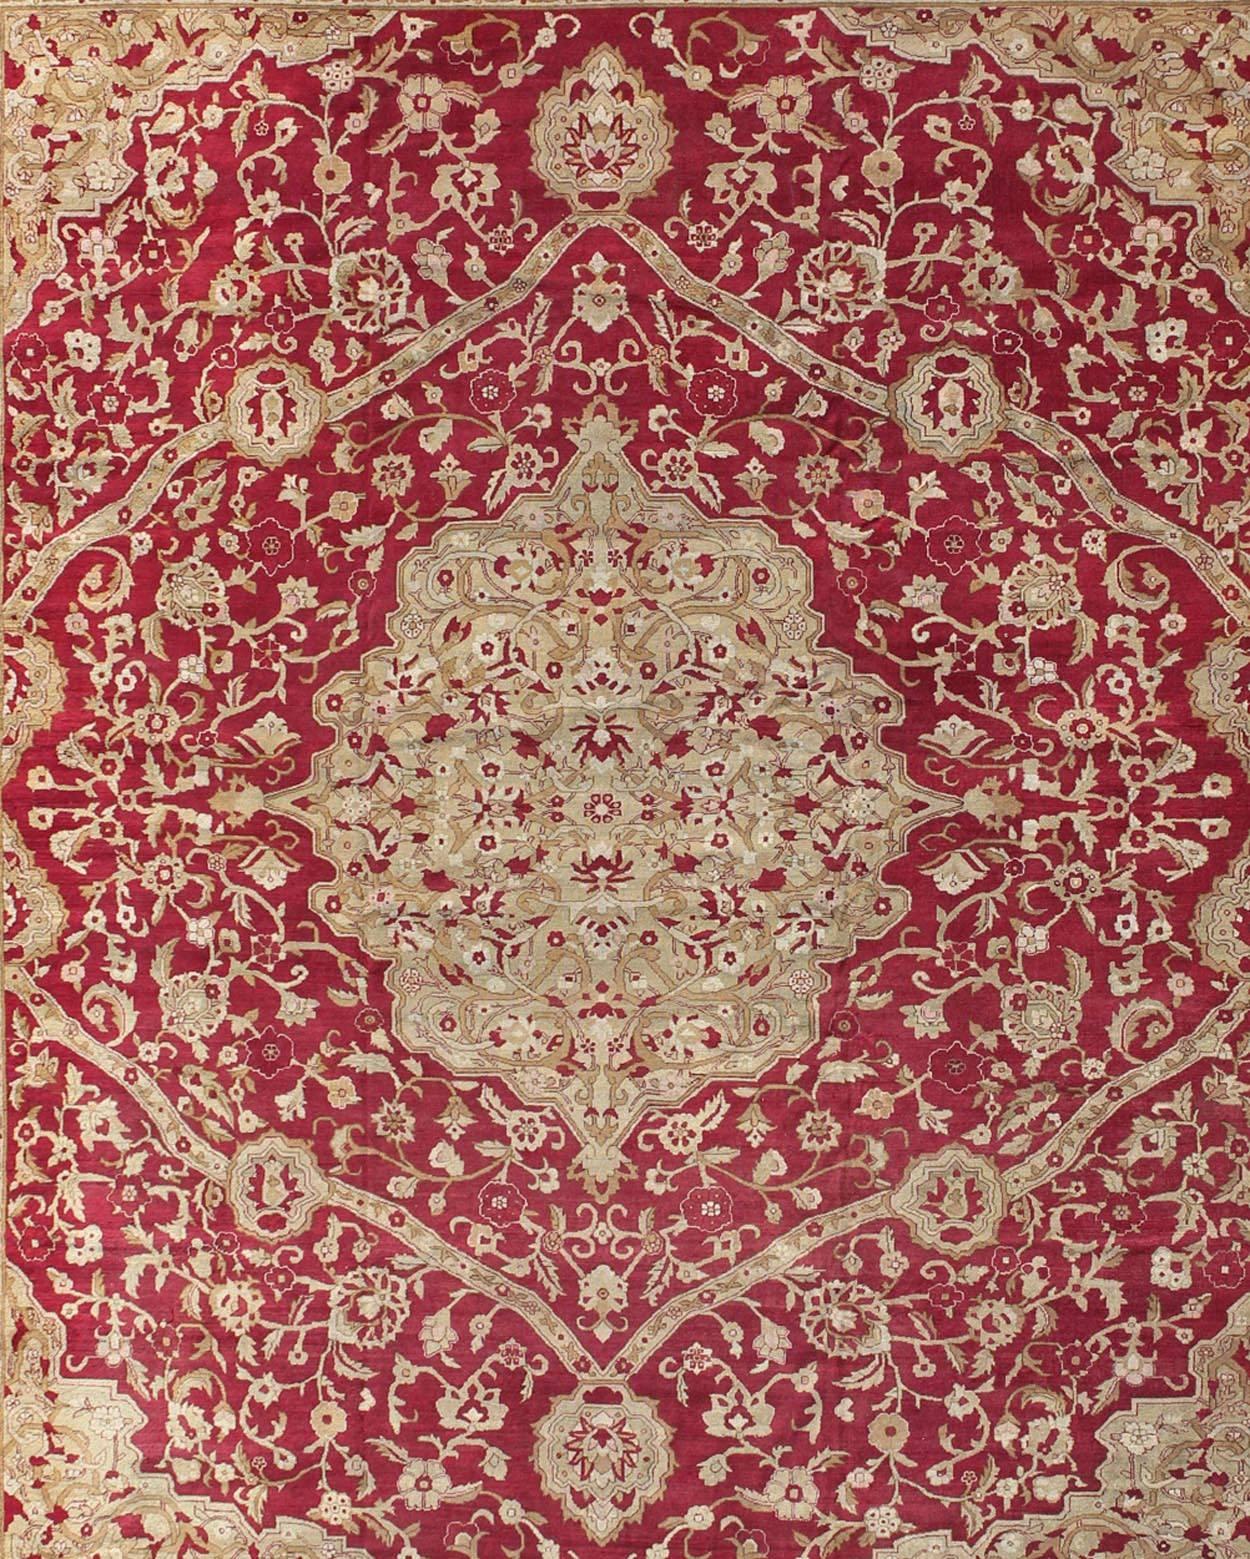 Indian Large Antique Agra Carpet with Floral Design in Red, Taupe and Light Green 